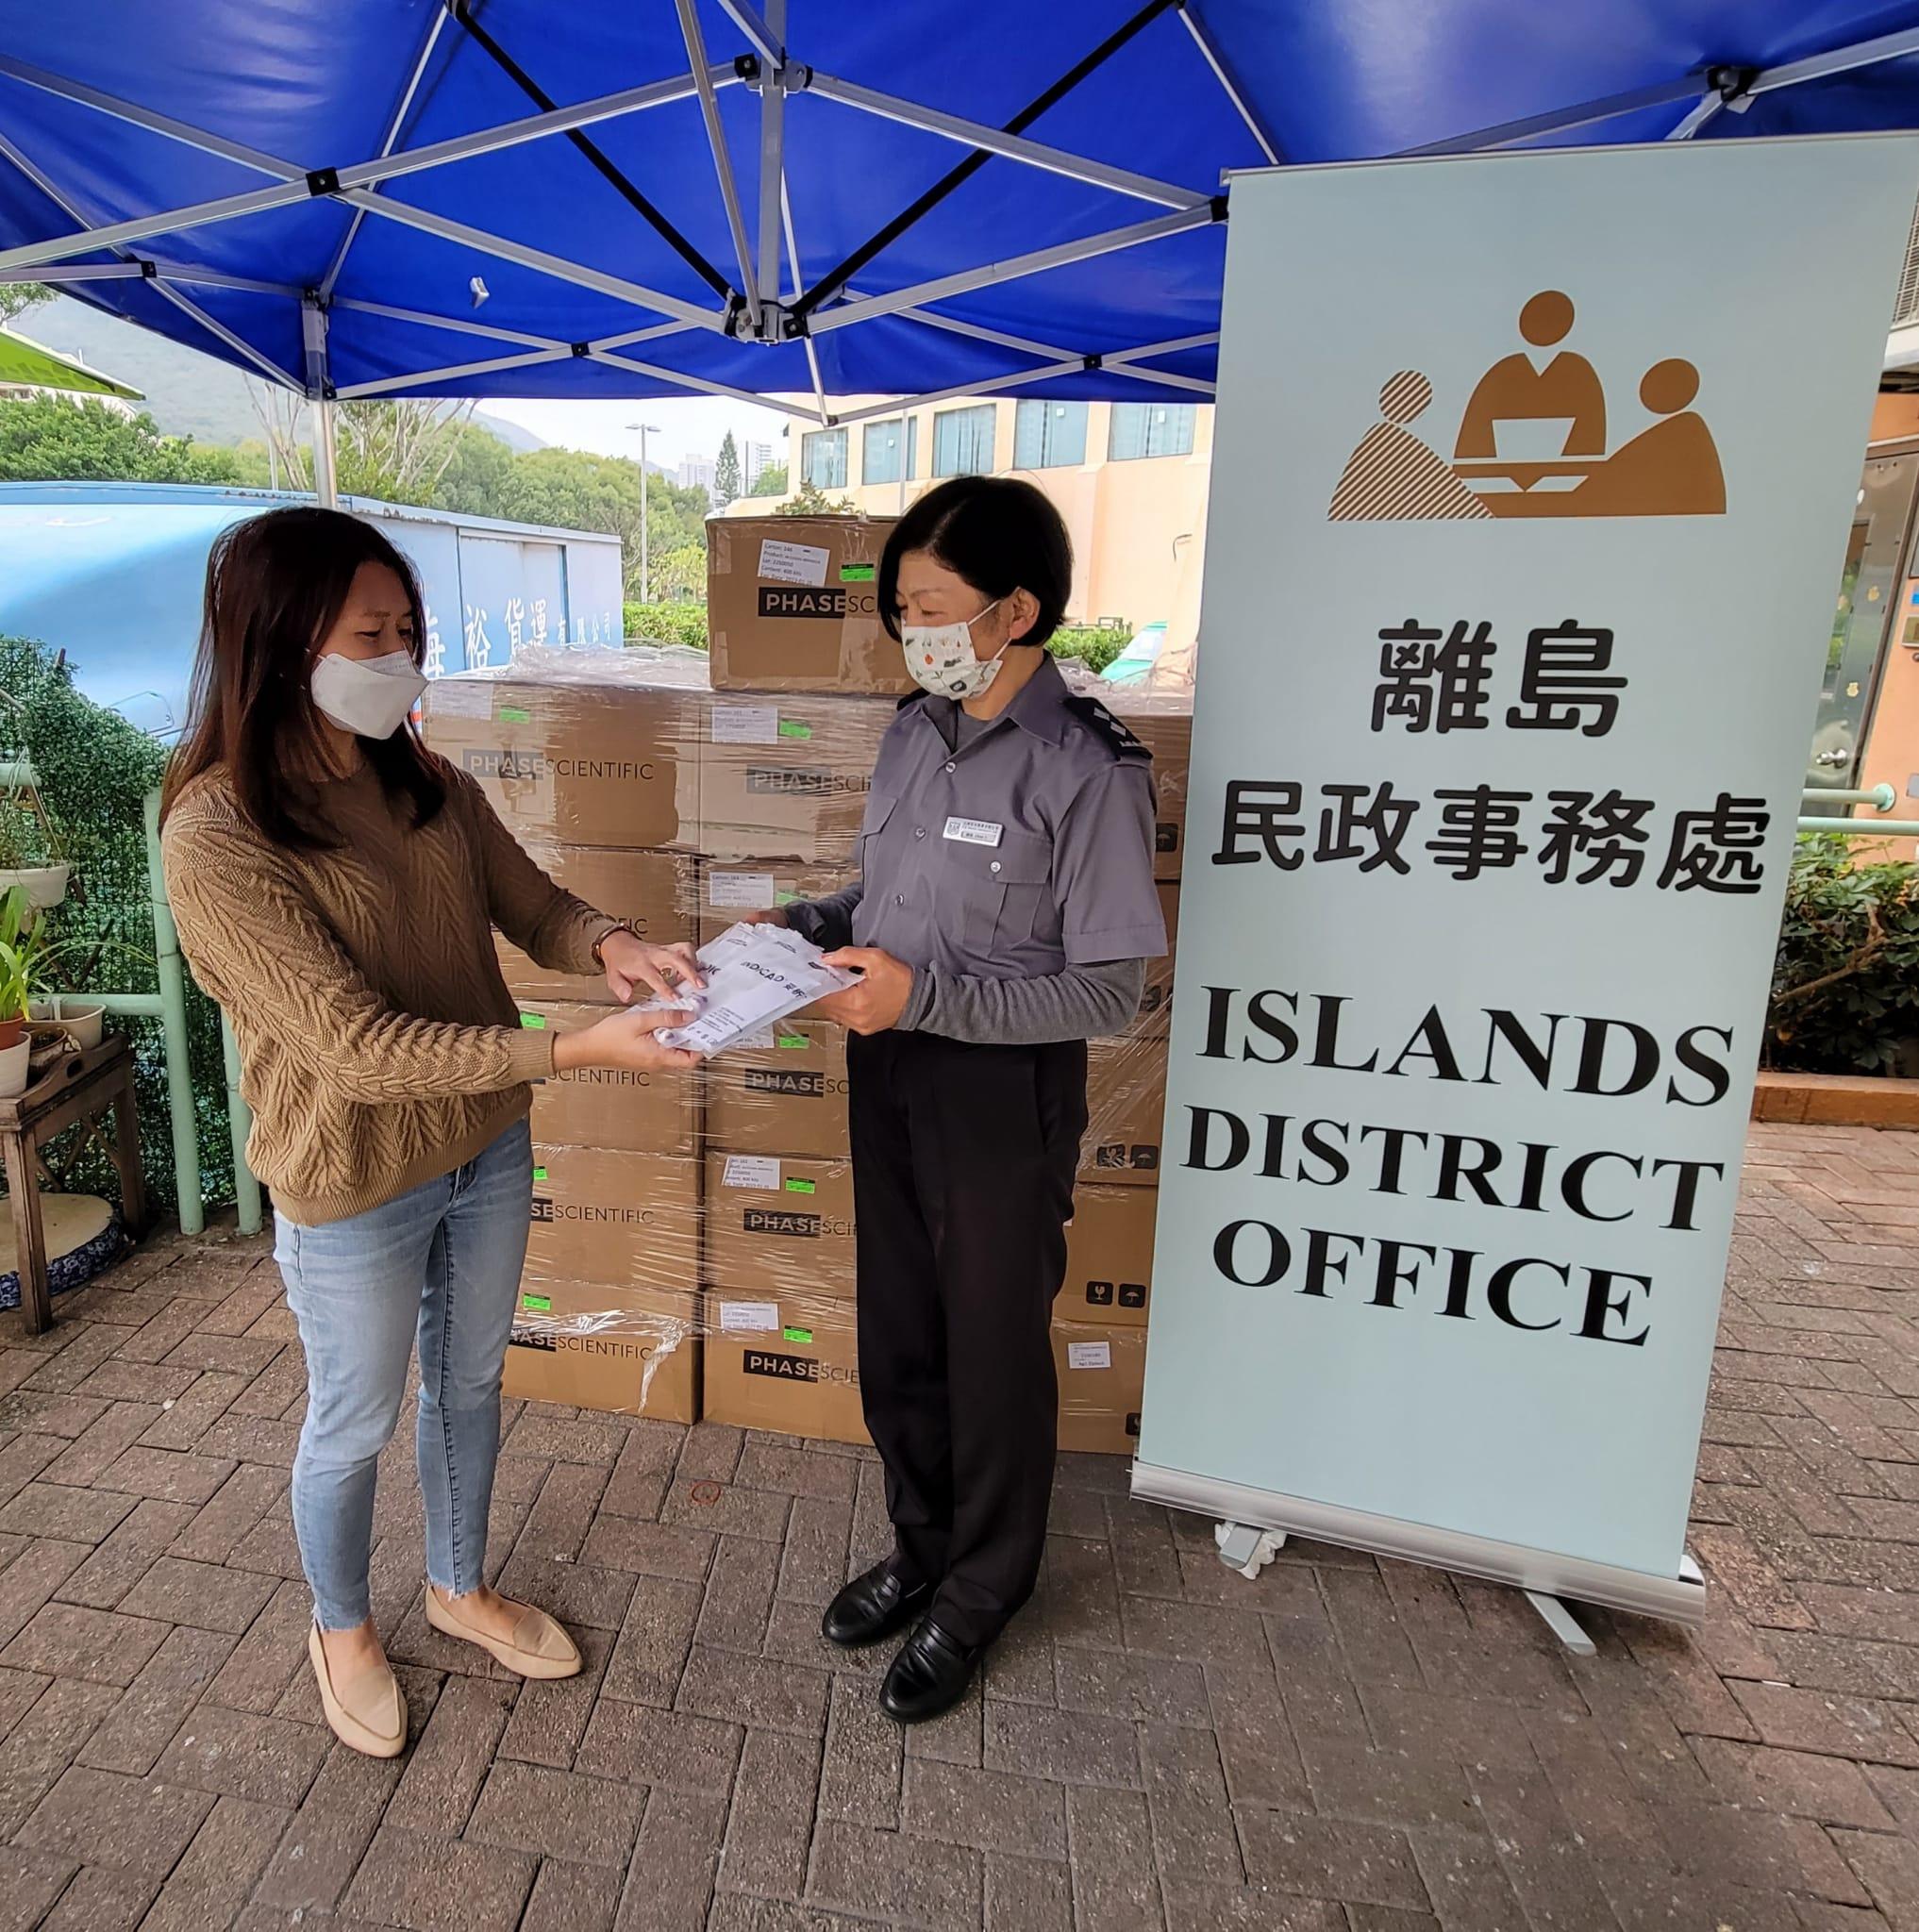 Islands District Office today (January 29) distributes boxes of rapid test kits to the property management company in Discovery Bay for testing by the residents.